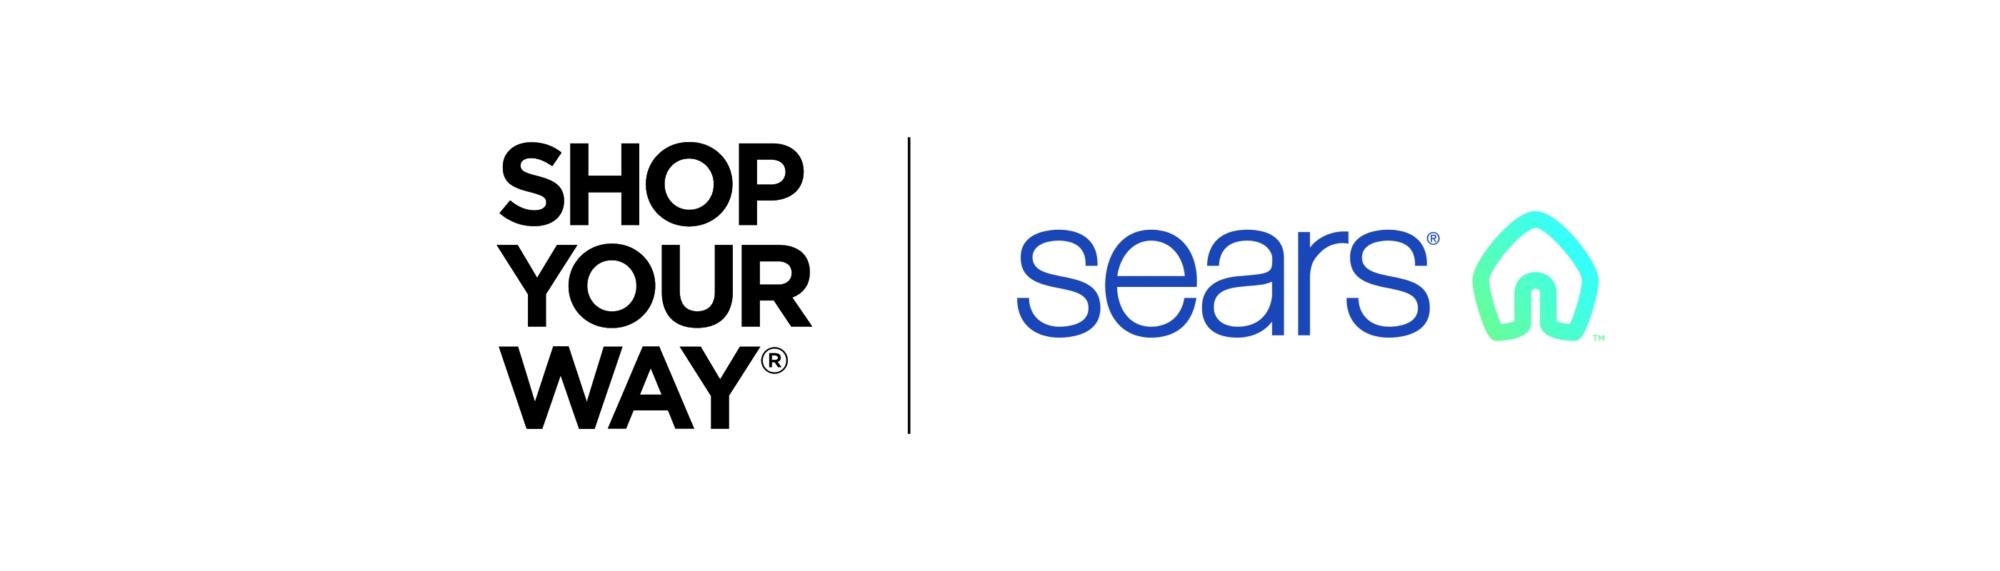 Sears Rewards Powered by Shop Your Way